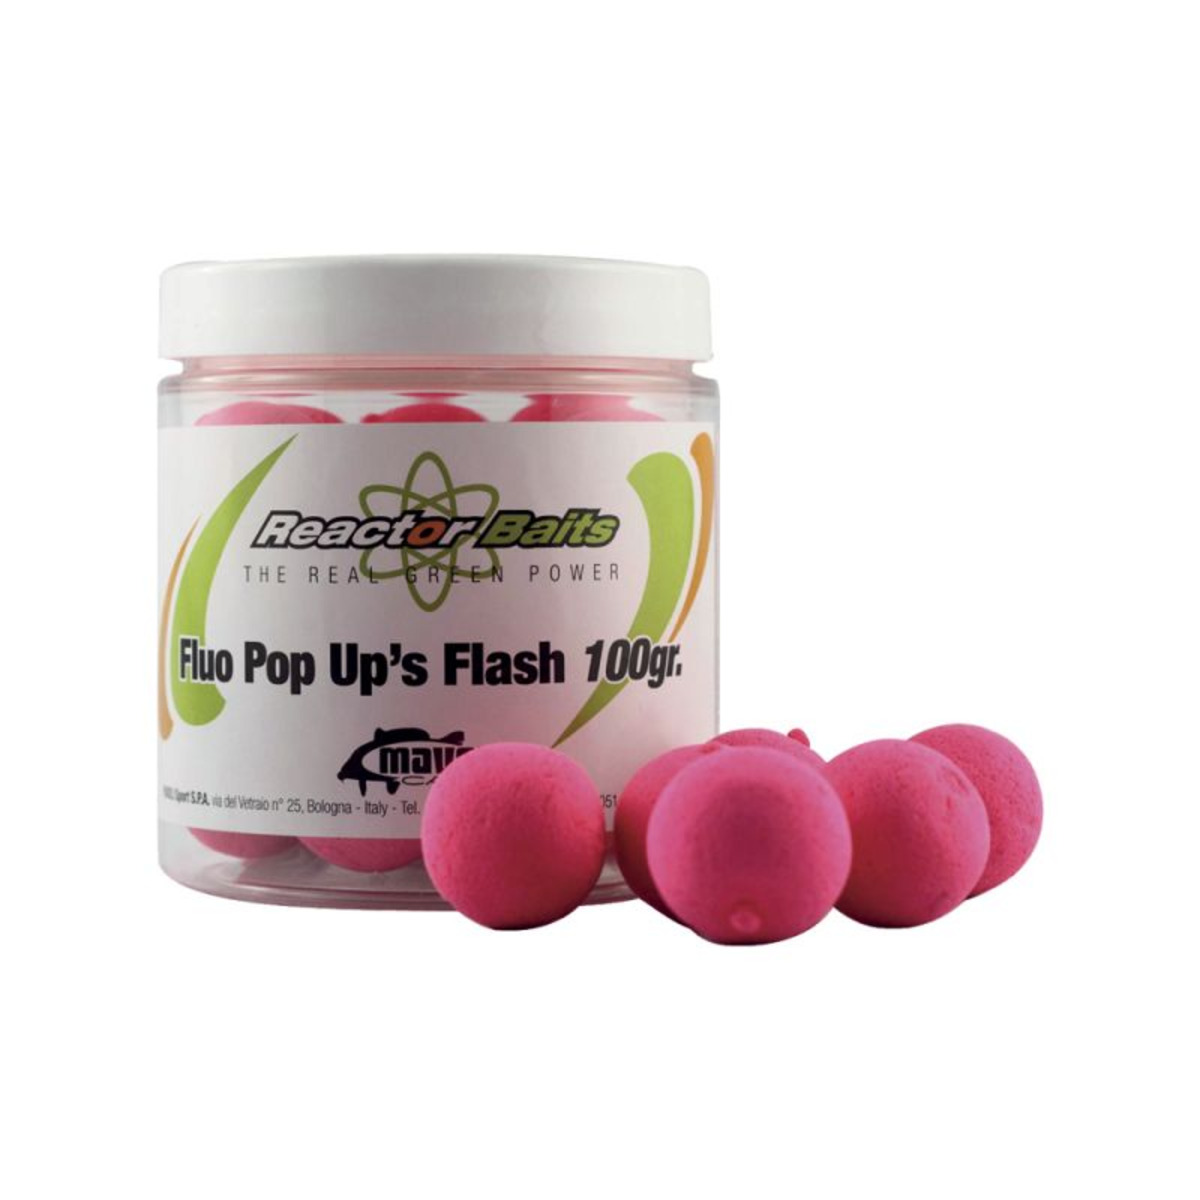 Reactor Baits Pop Up Flash Fluo Neutral Flavour - Pink Fluo - 15 mm